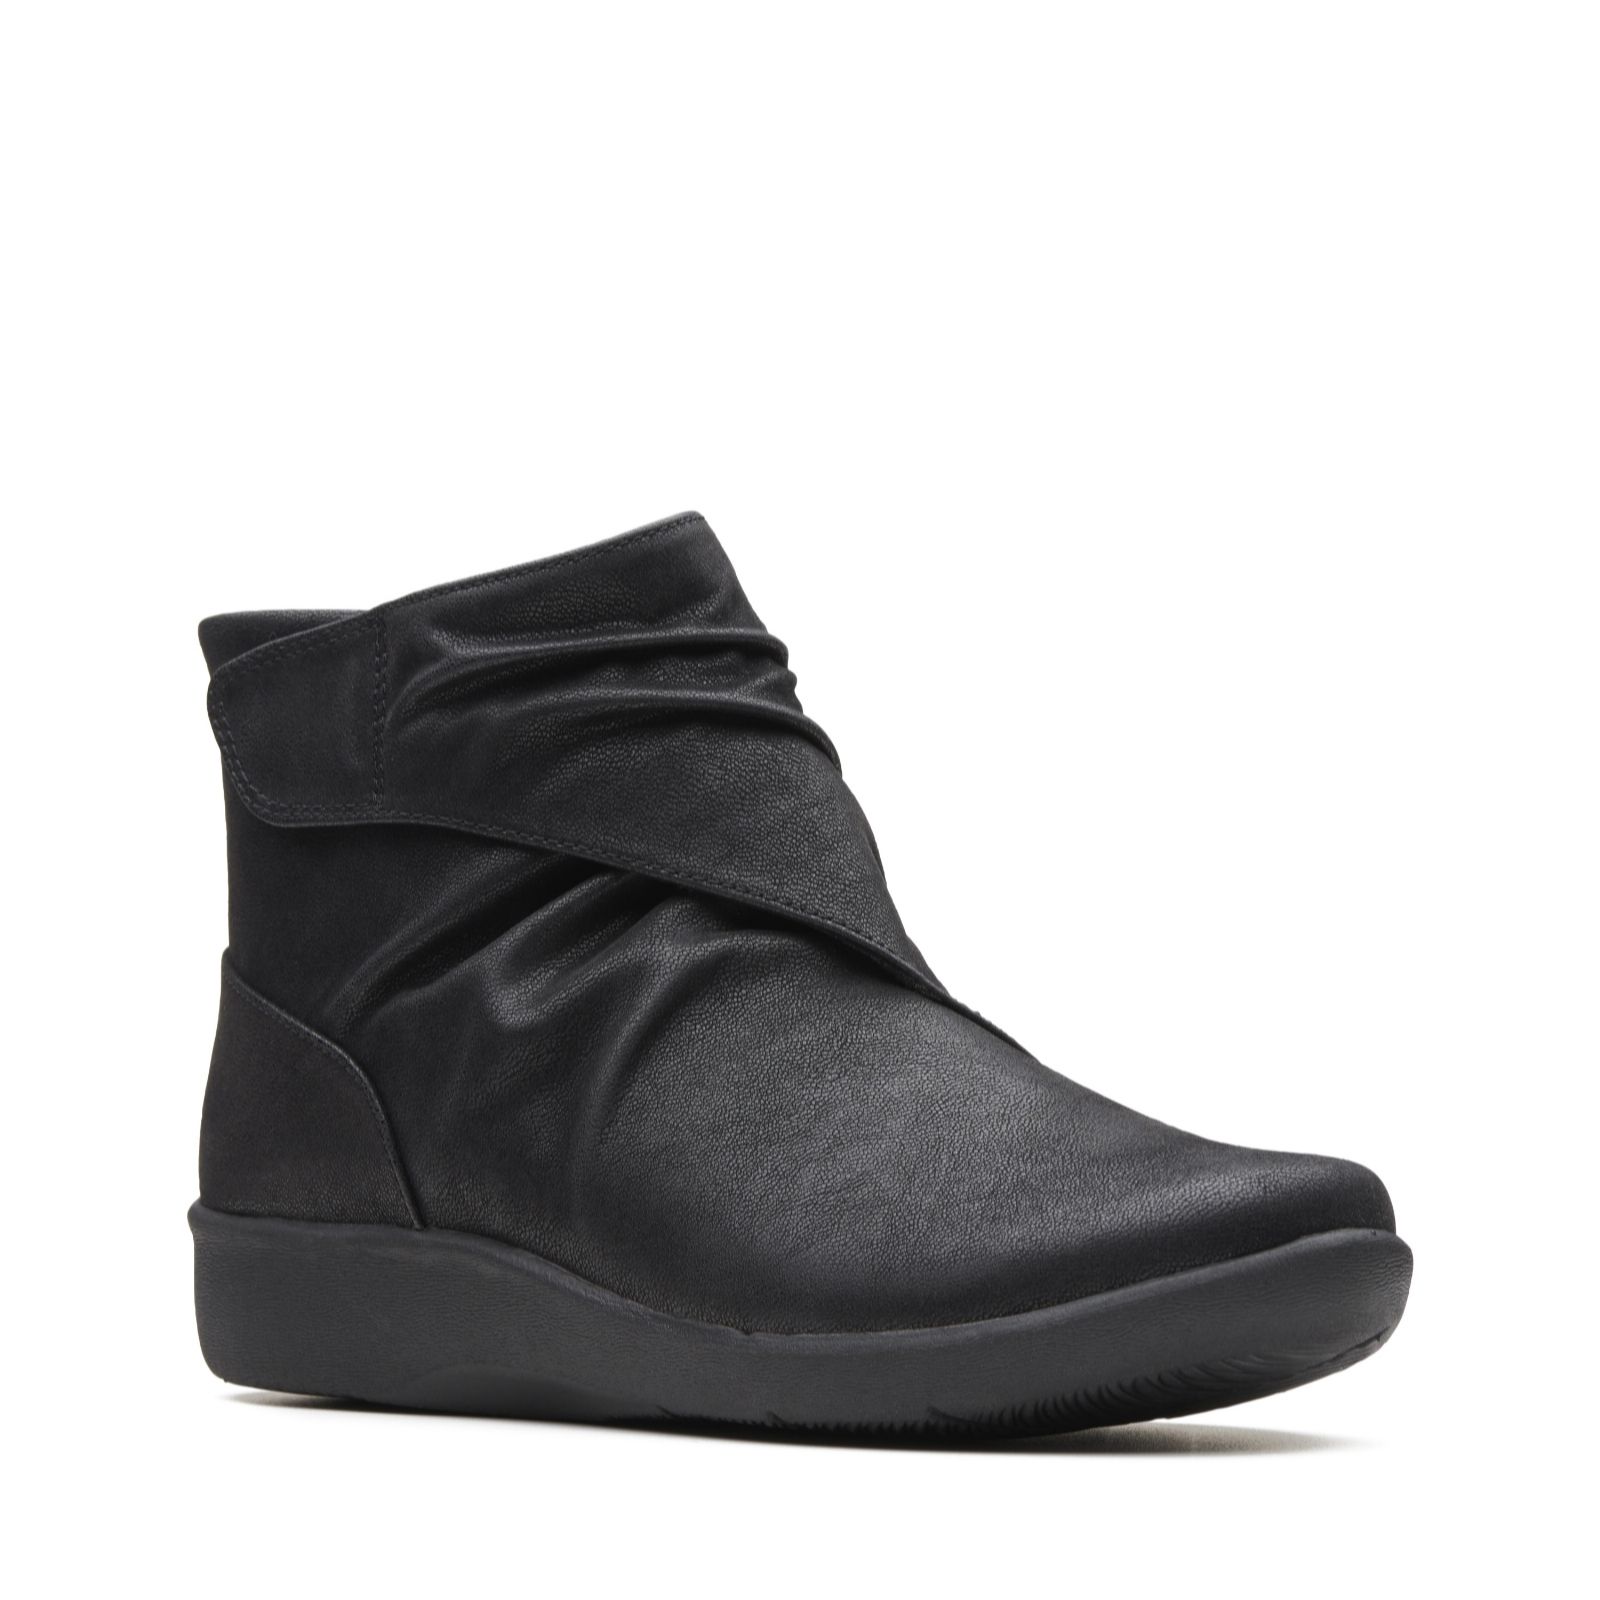 Clarks Sillian Tana Ankle Boot Wide Fit 